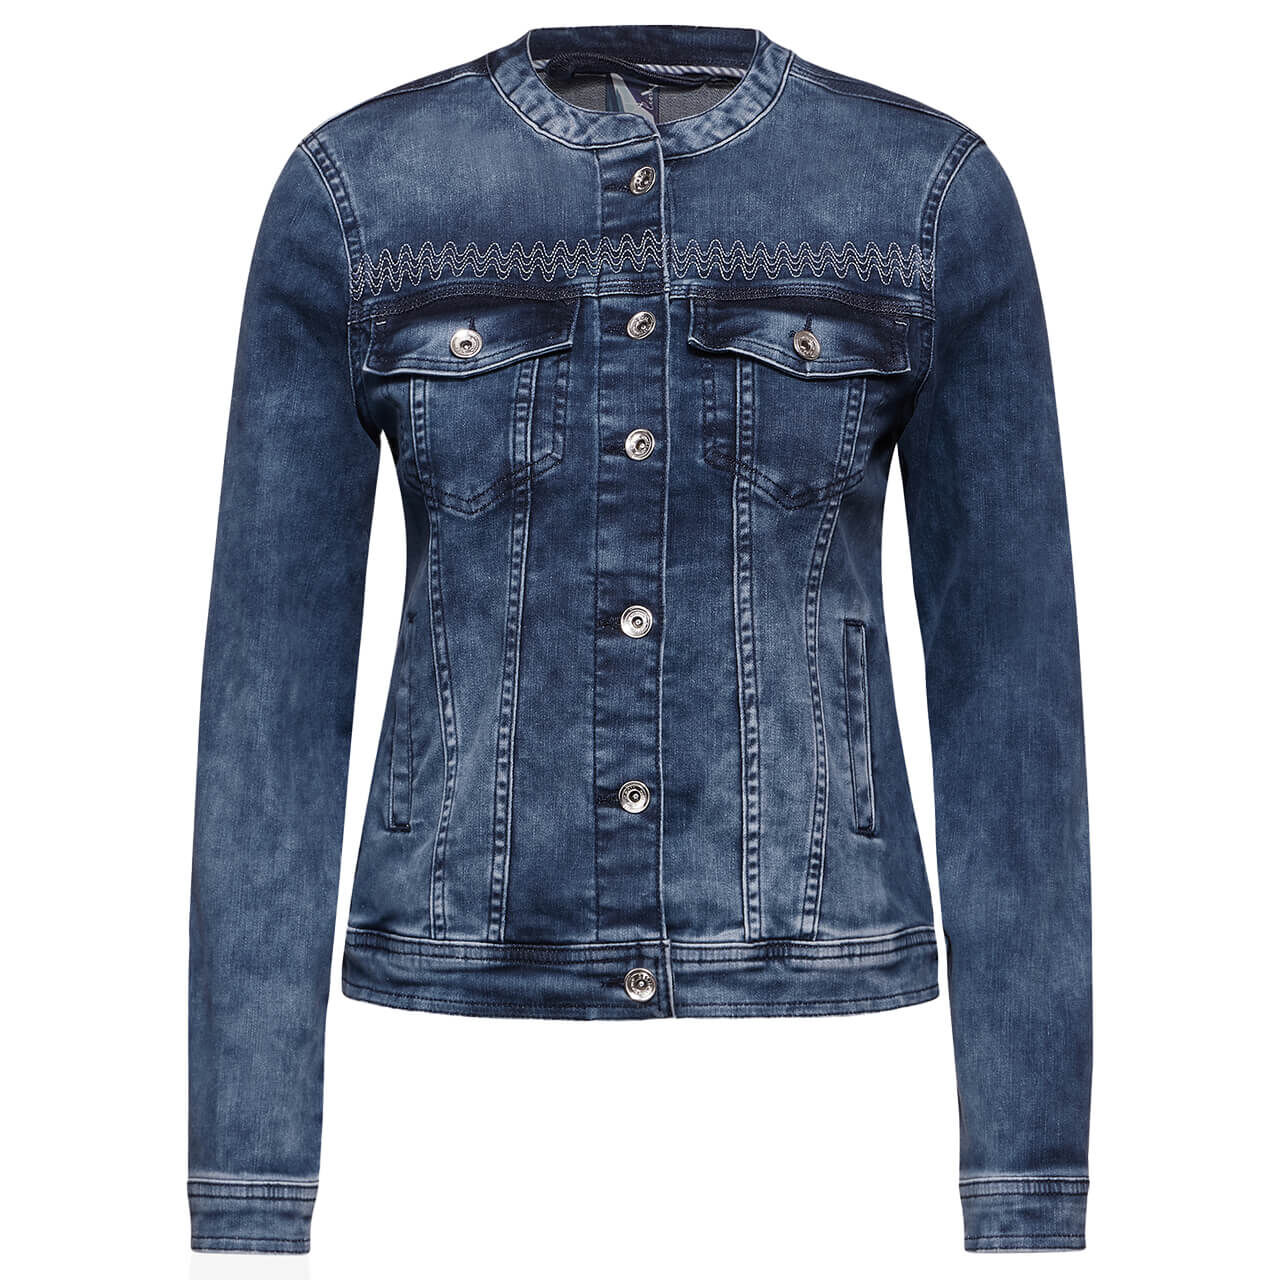 Cecil Damen Jeansjacke mid blue washed embroidery